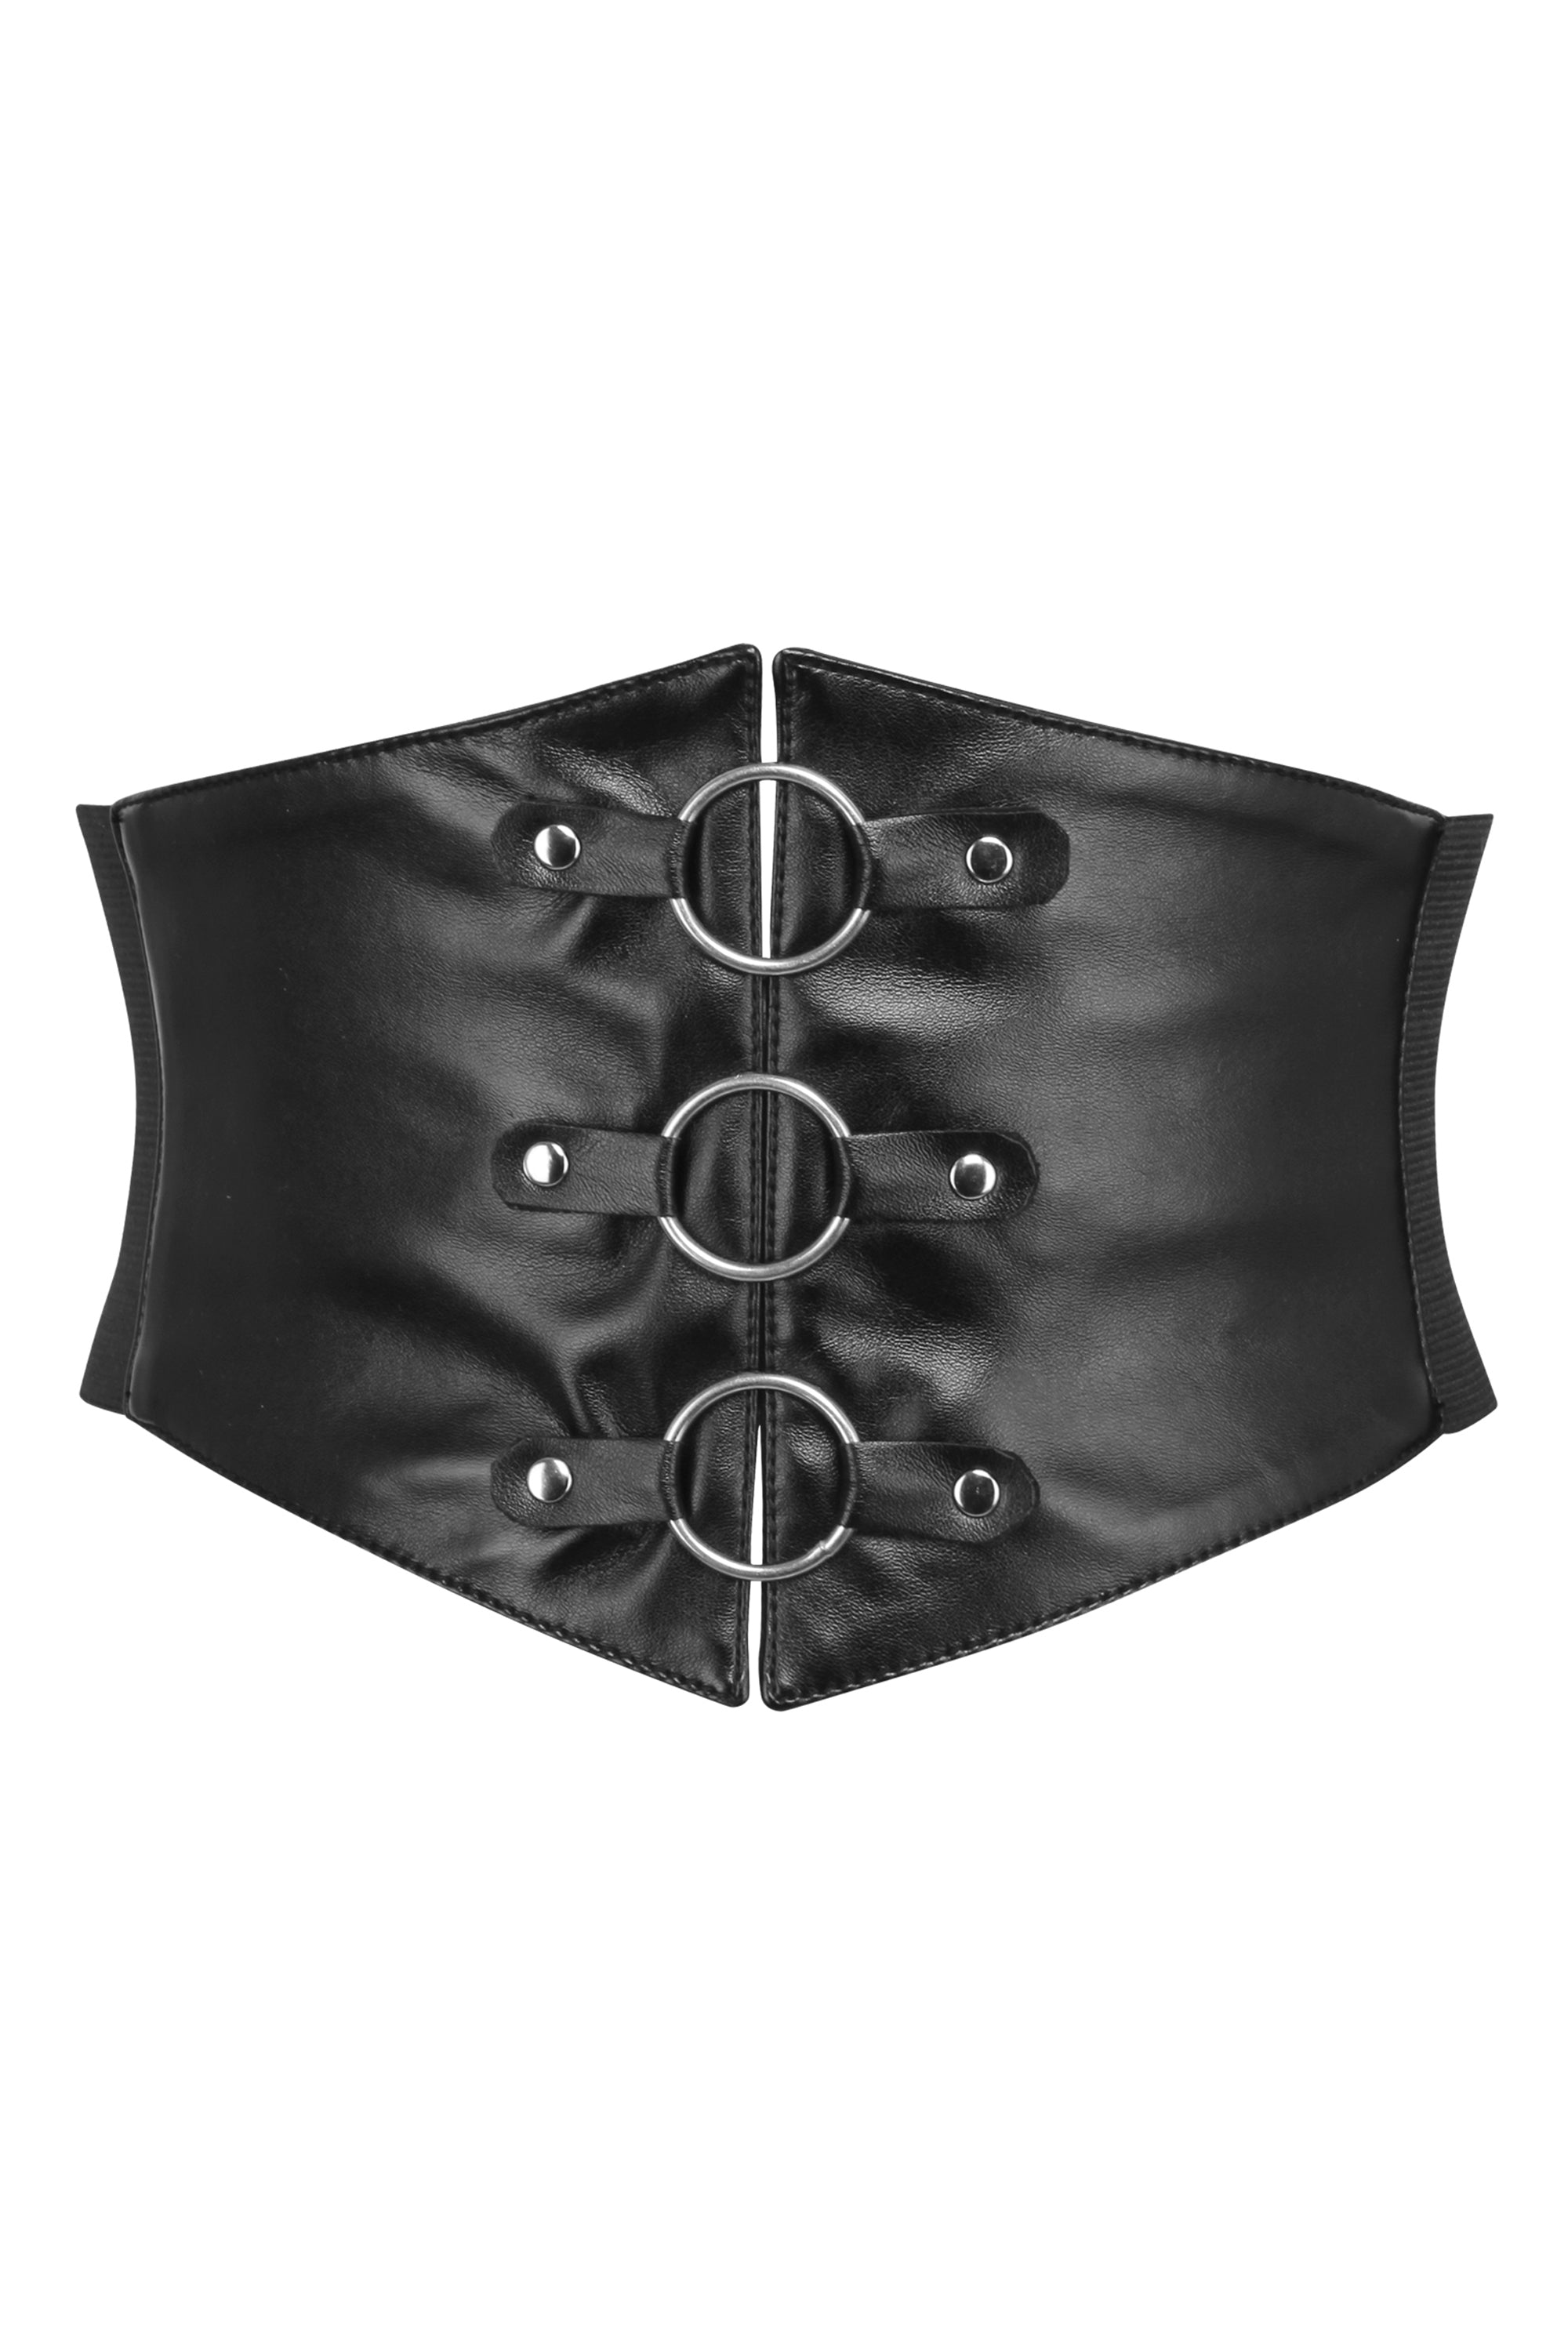 Faux Leather Corset with Cups, How To Make A Corset